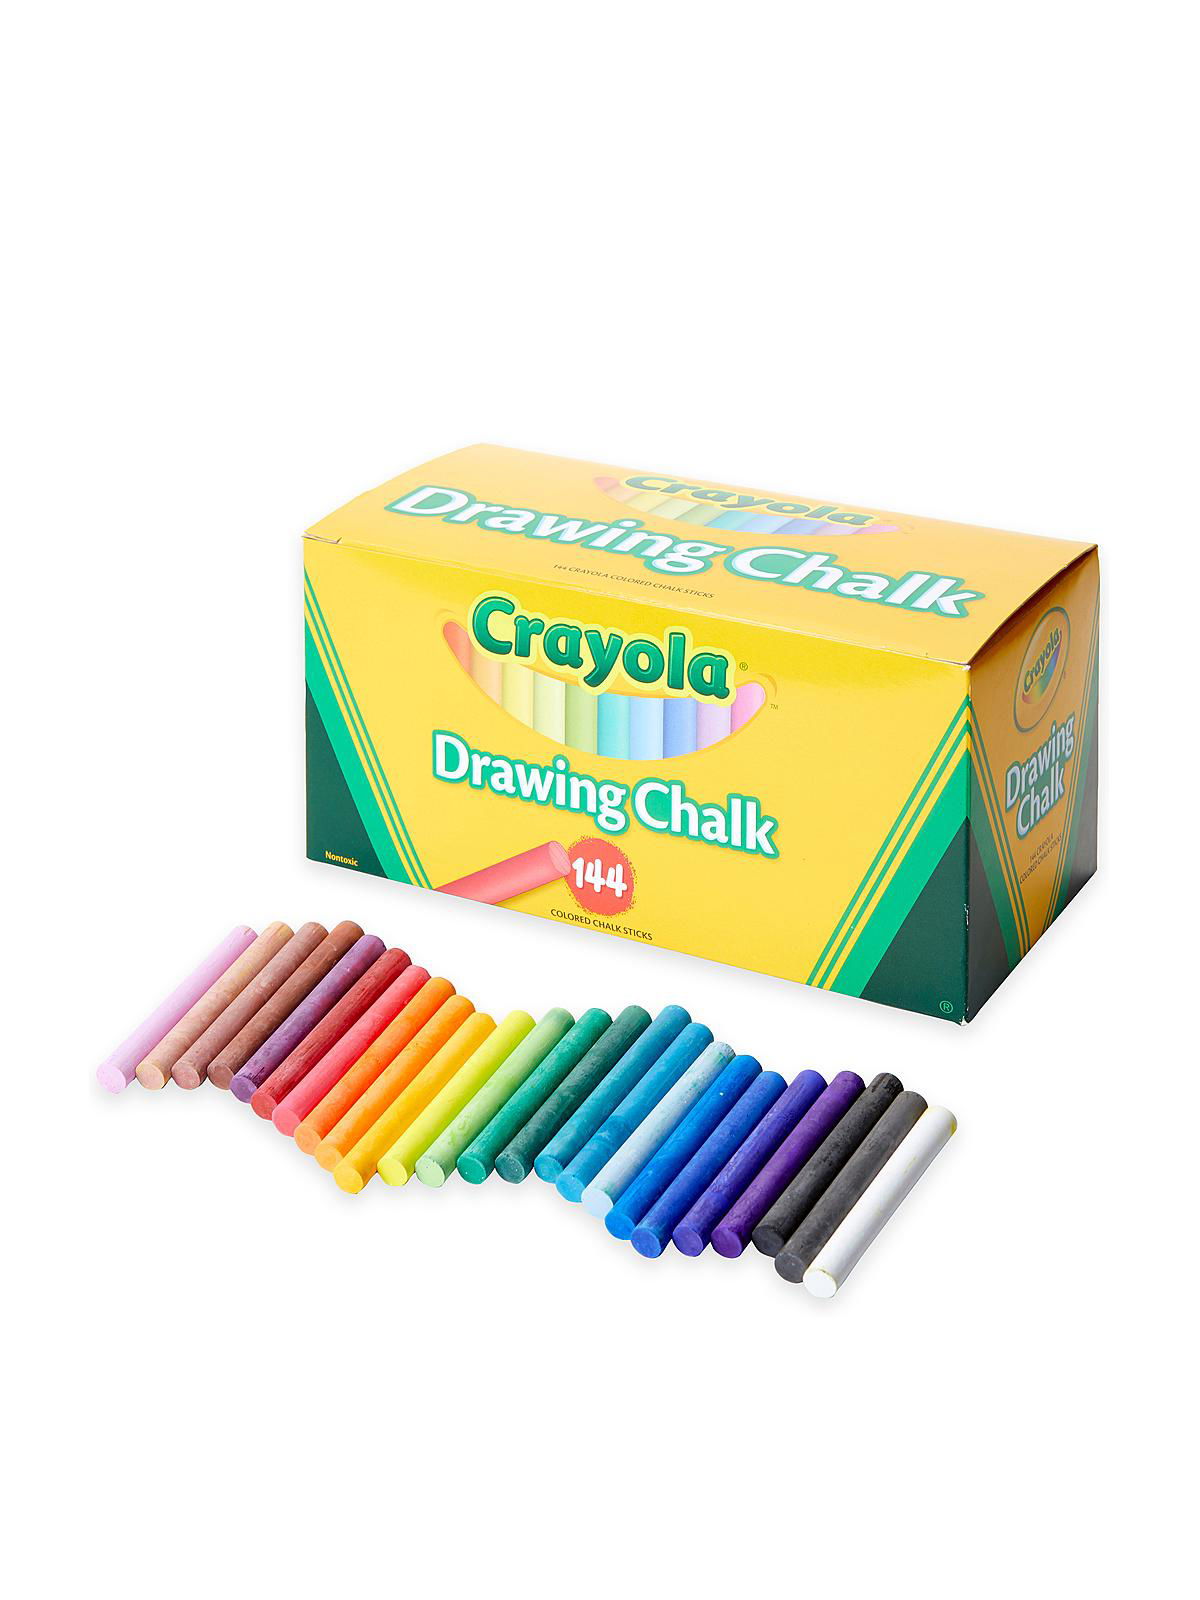 Crayola Assorted Colors Drawing Chalk | MisterArt.com